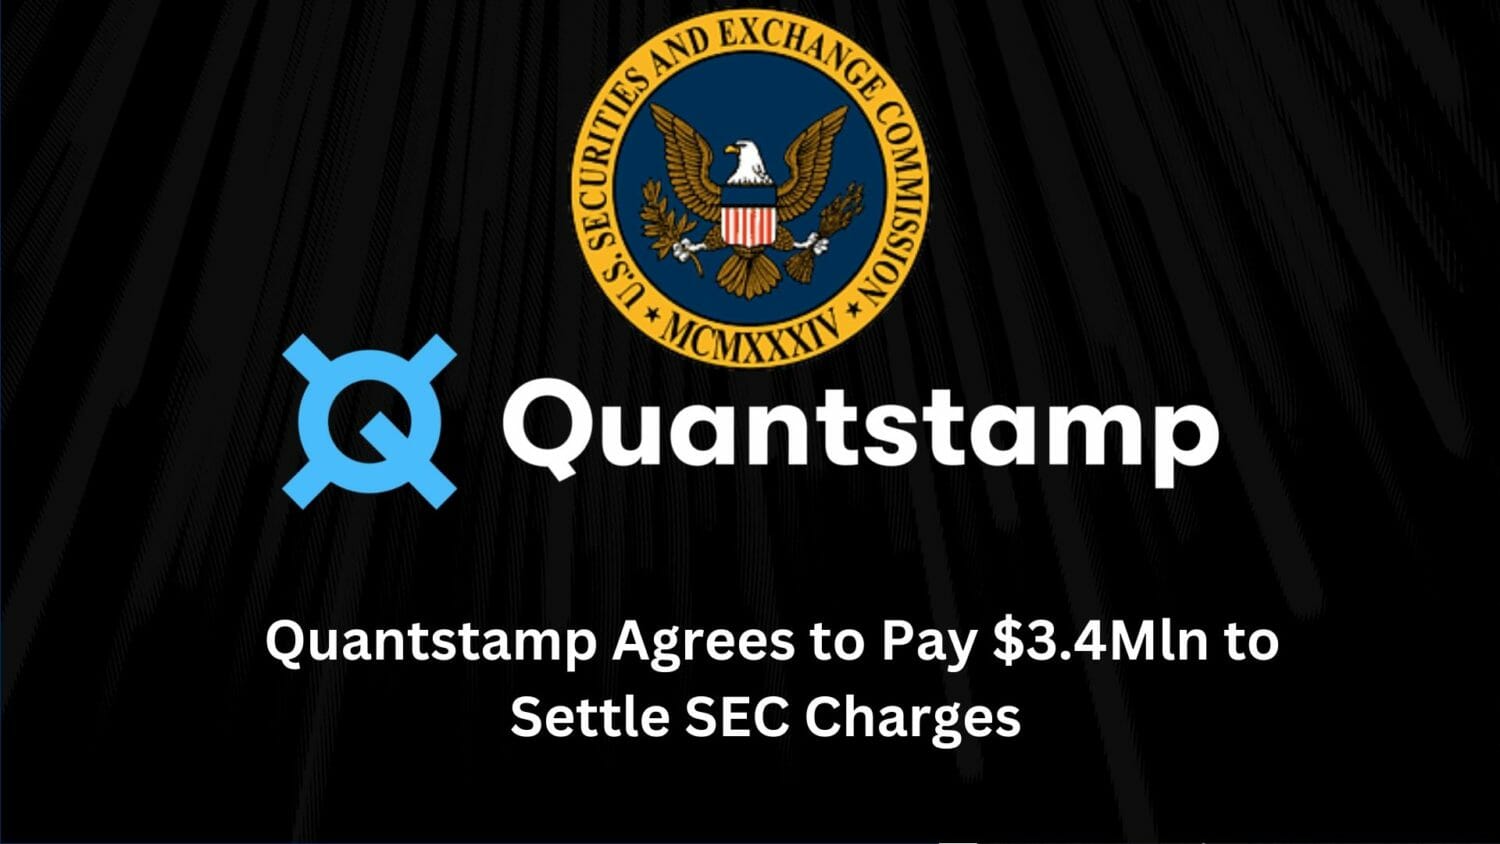 Quantstamp Agrees To Pay $3.4Mln To Settle Sec Charges Over Unregistered Ico